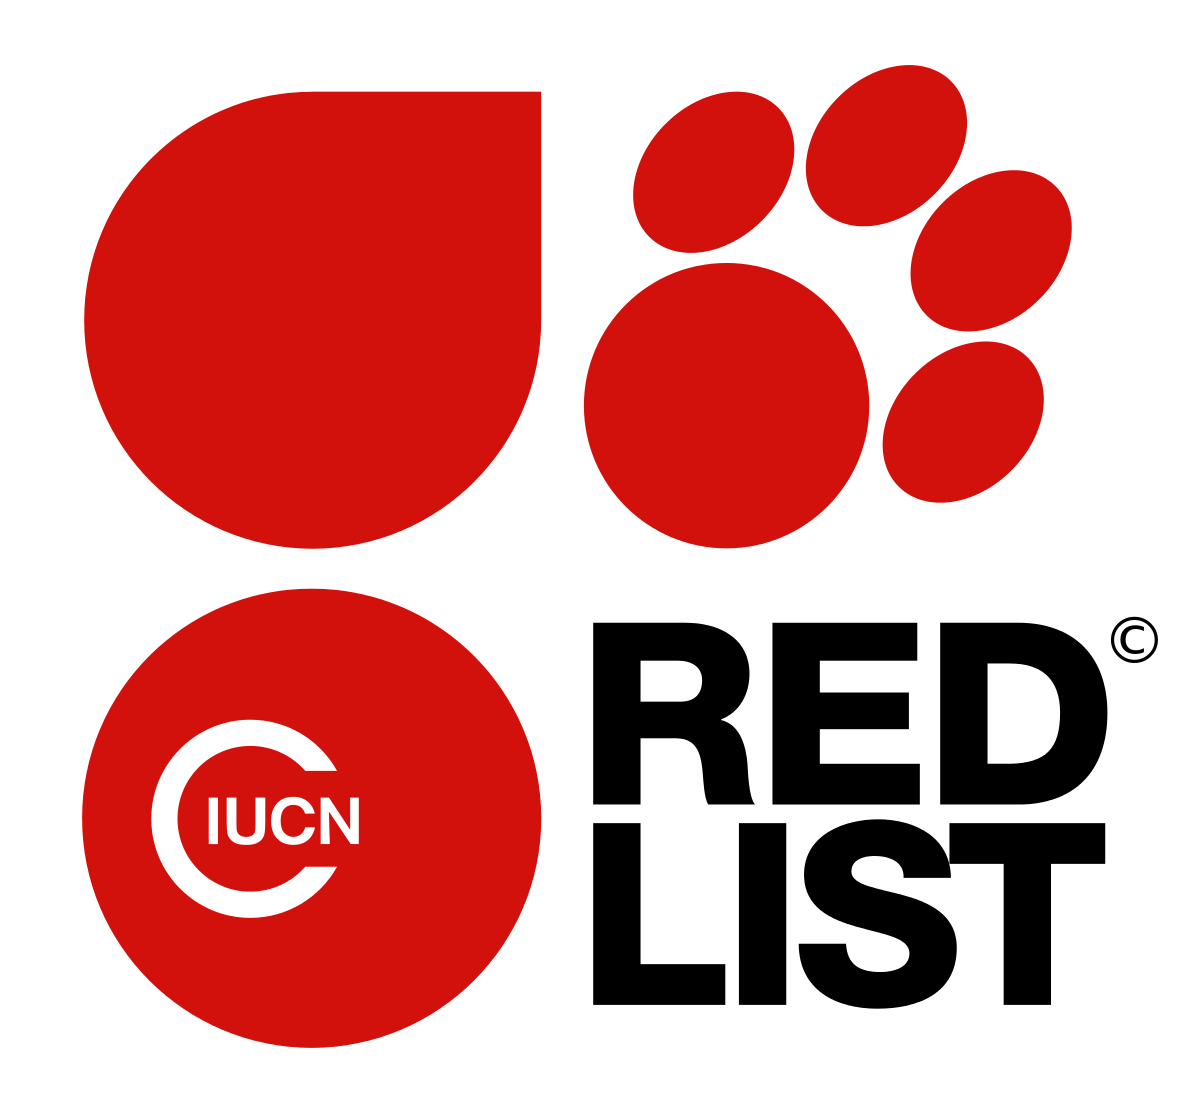 The IUCN Red List's logo is shown, with small white text that says 